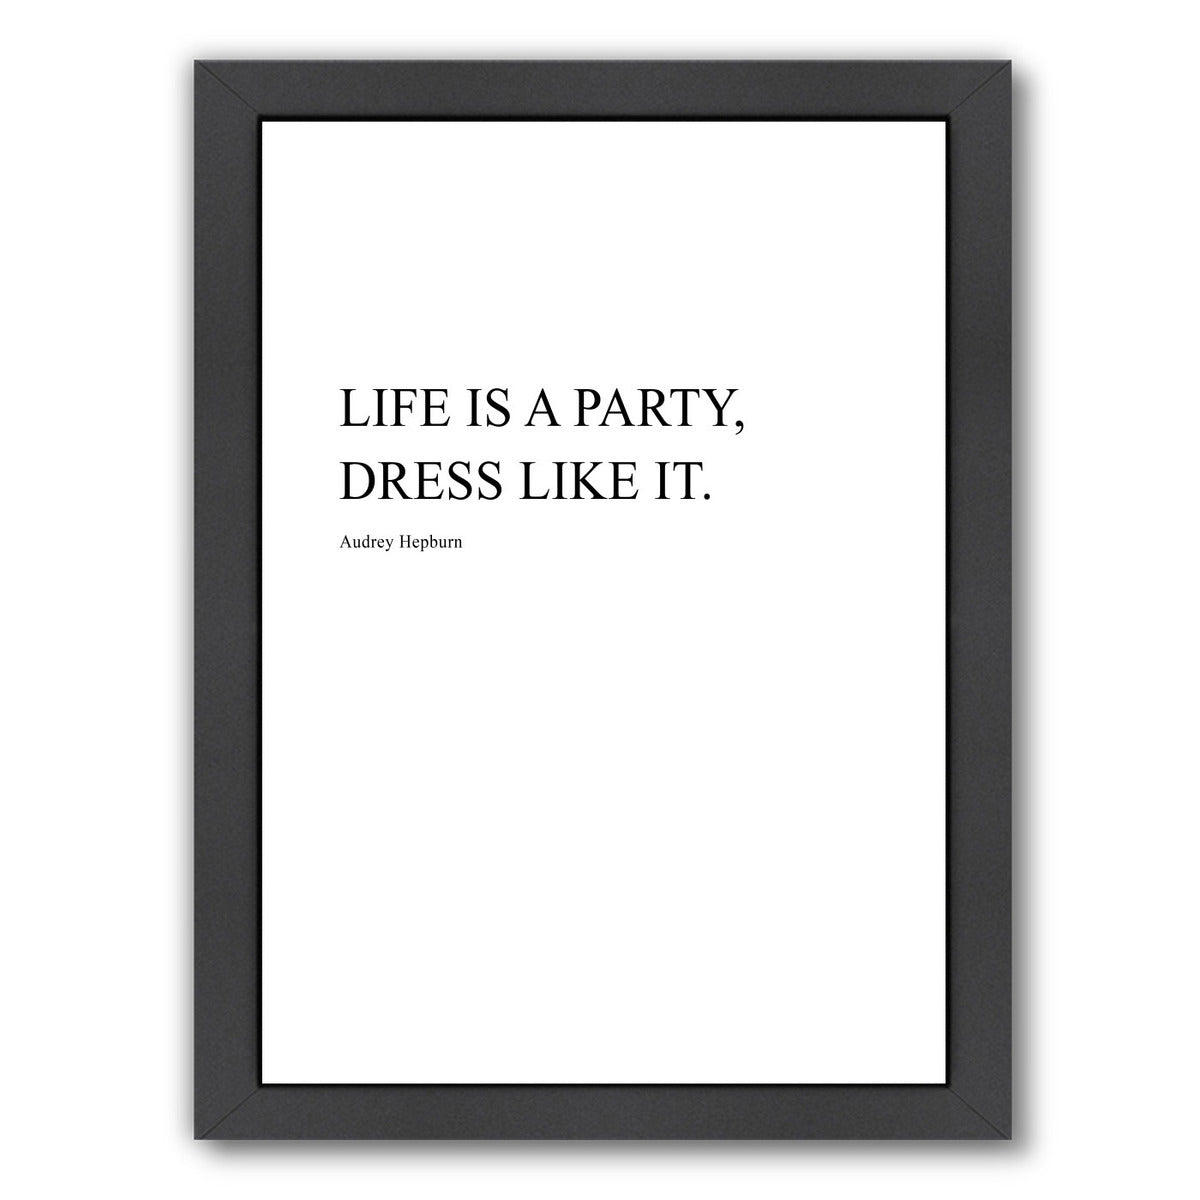 Life Is A Party by Explicit Design Framed Print - Americanflat